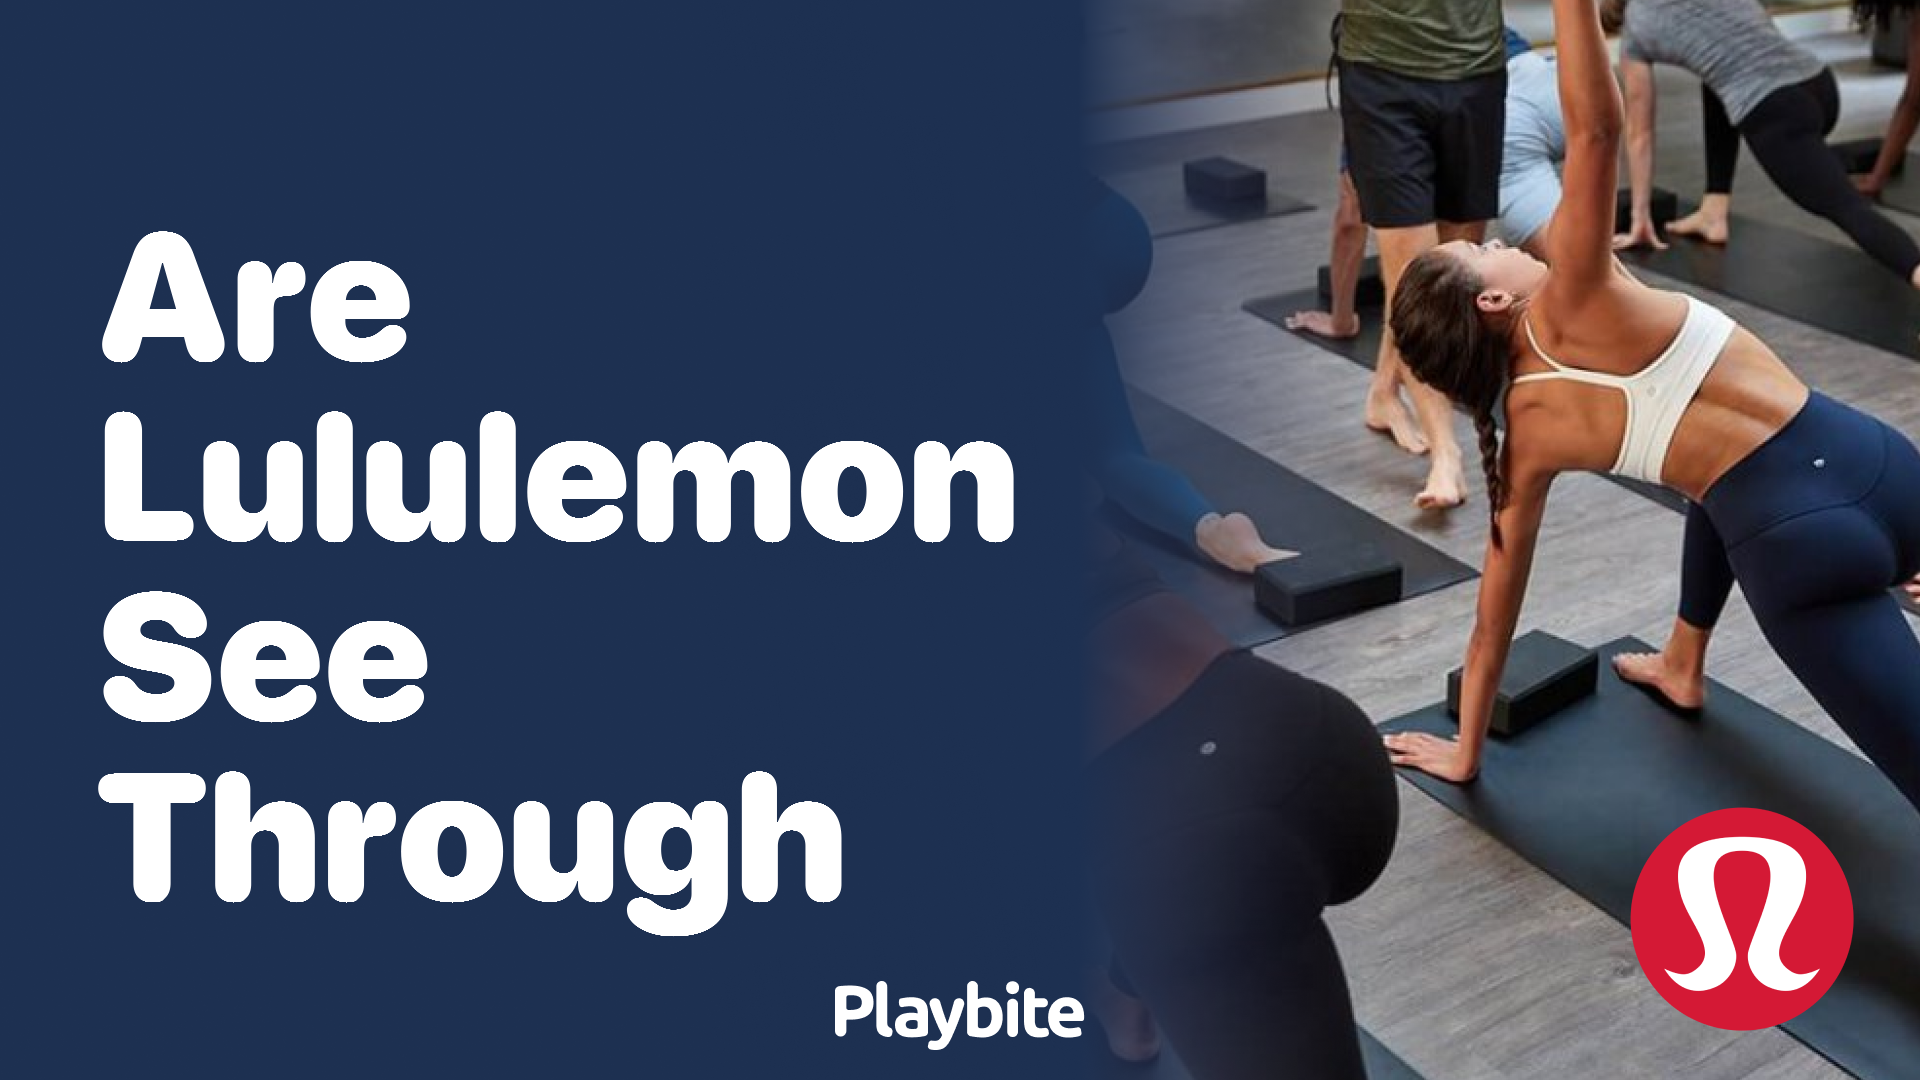 Are Lululemon Clothes See-Through? Let's Find Out! - Playbite